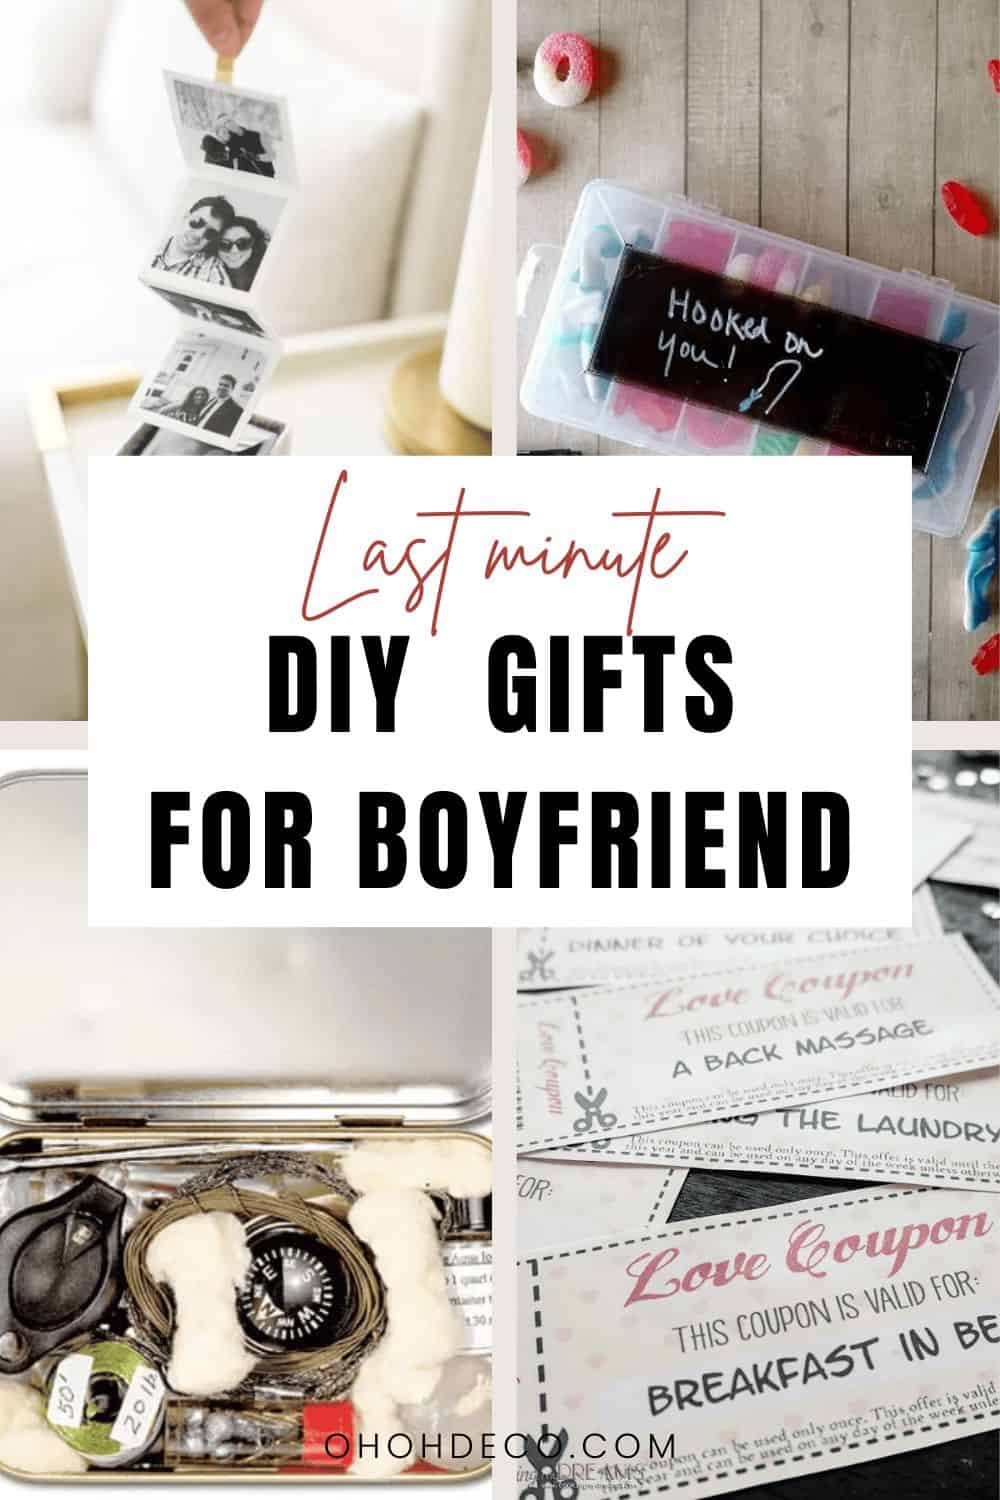 Romantic Homemade Gifts for a Boyfriend on His Birthday | ehow